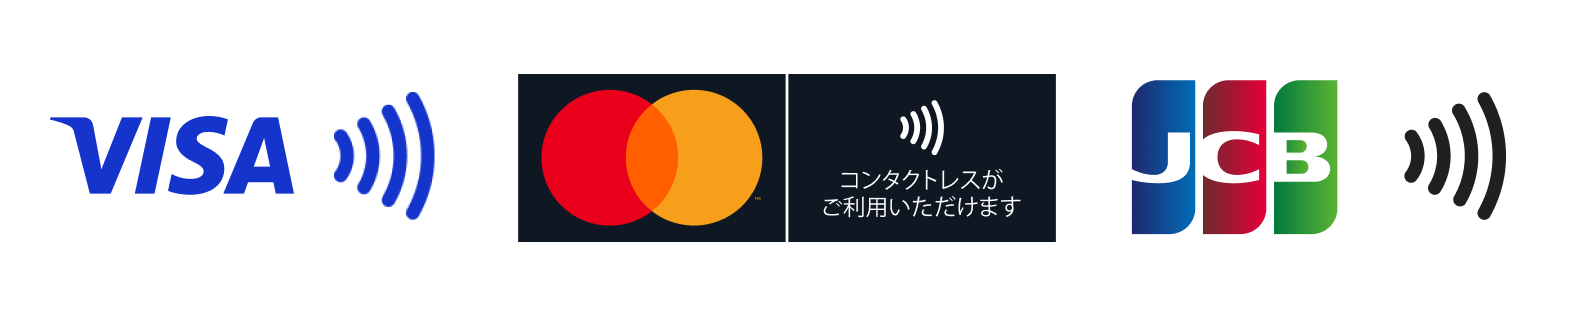 brand_contactless.png